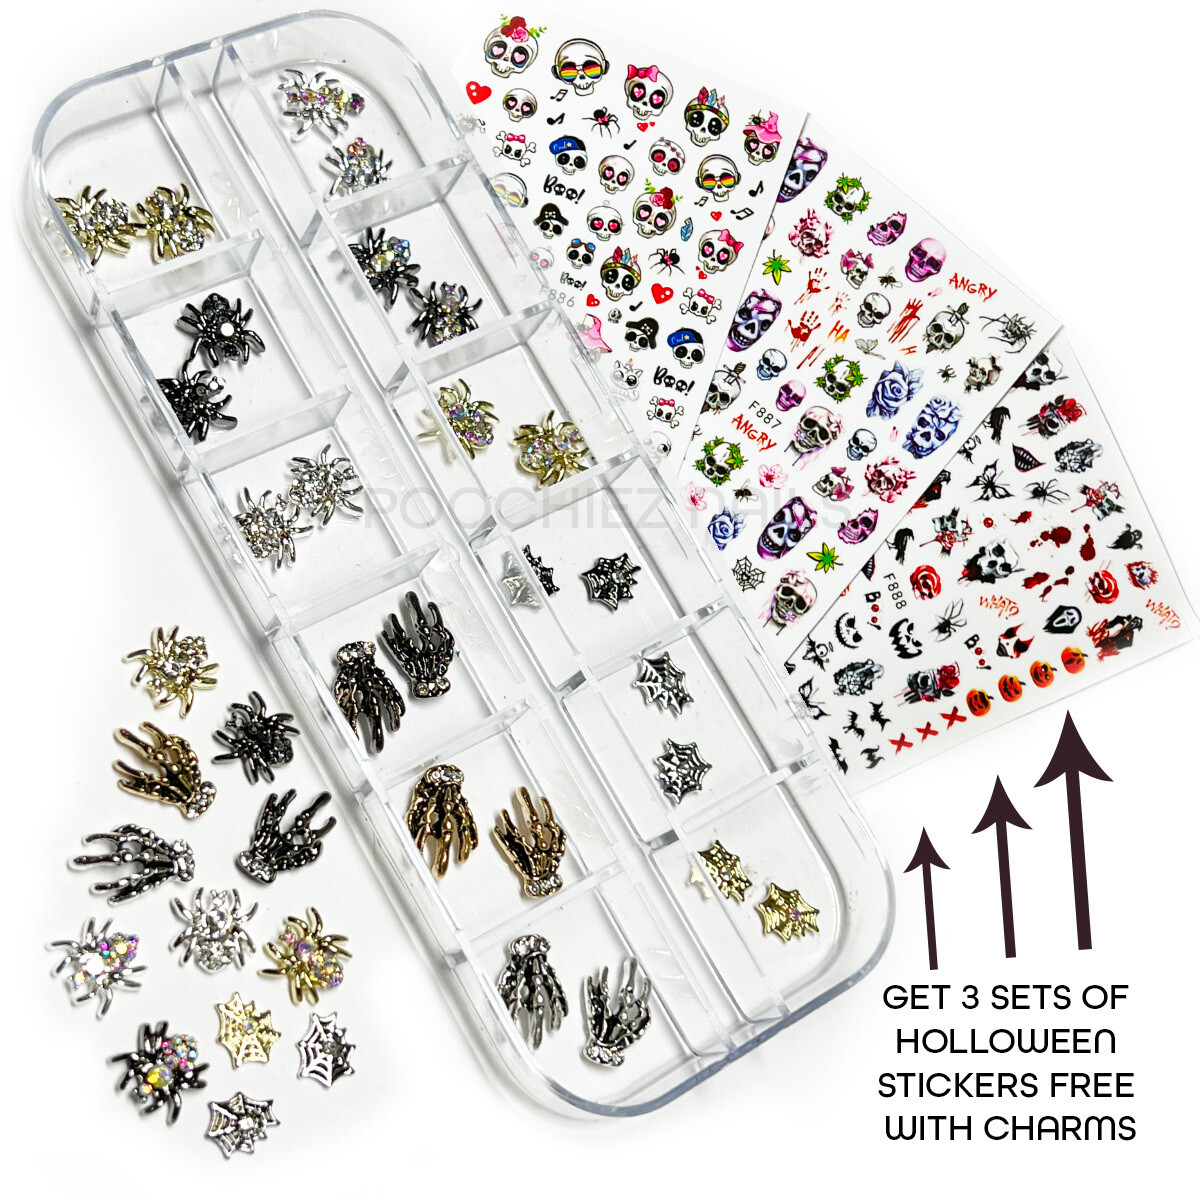 HALLOWEEN CHARMS 36ct + 3 PACKS STICKERS